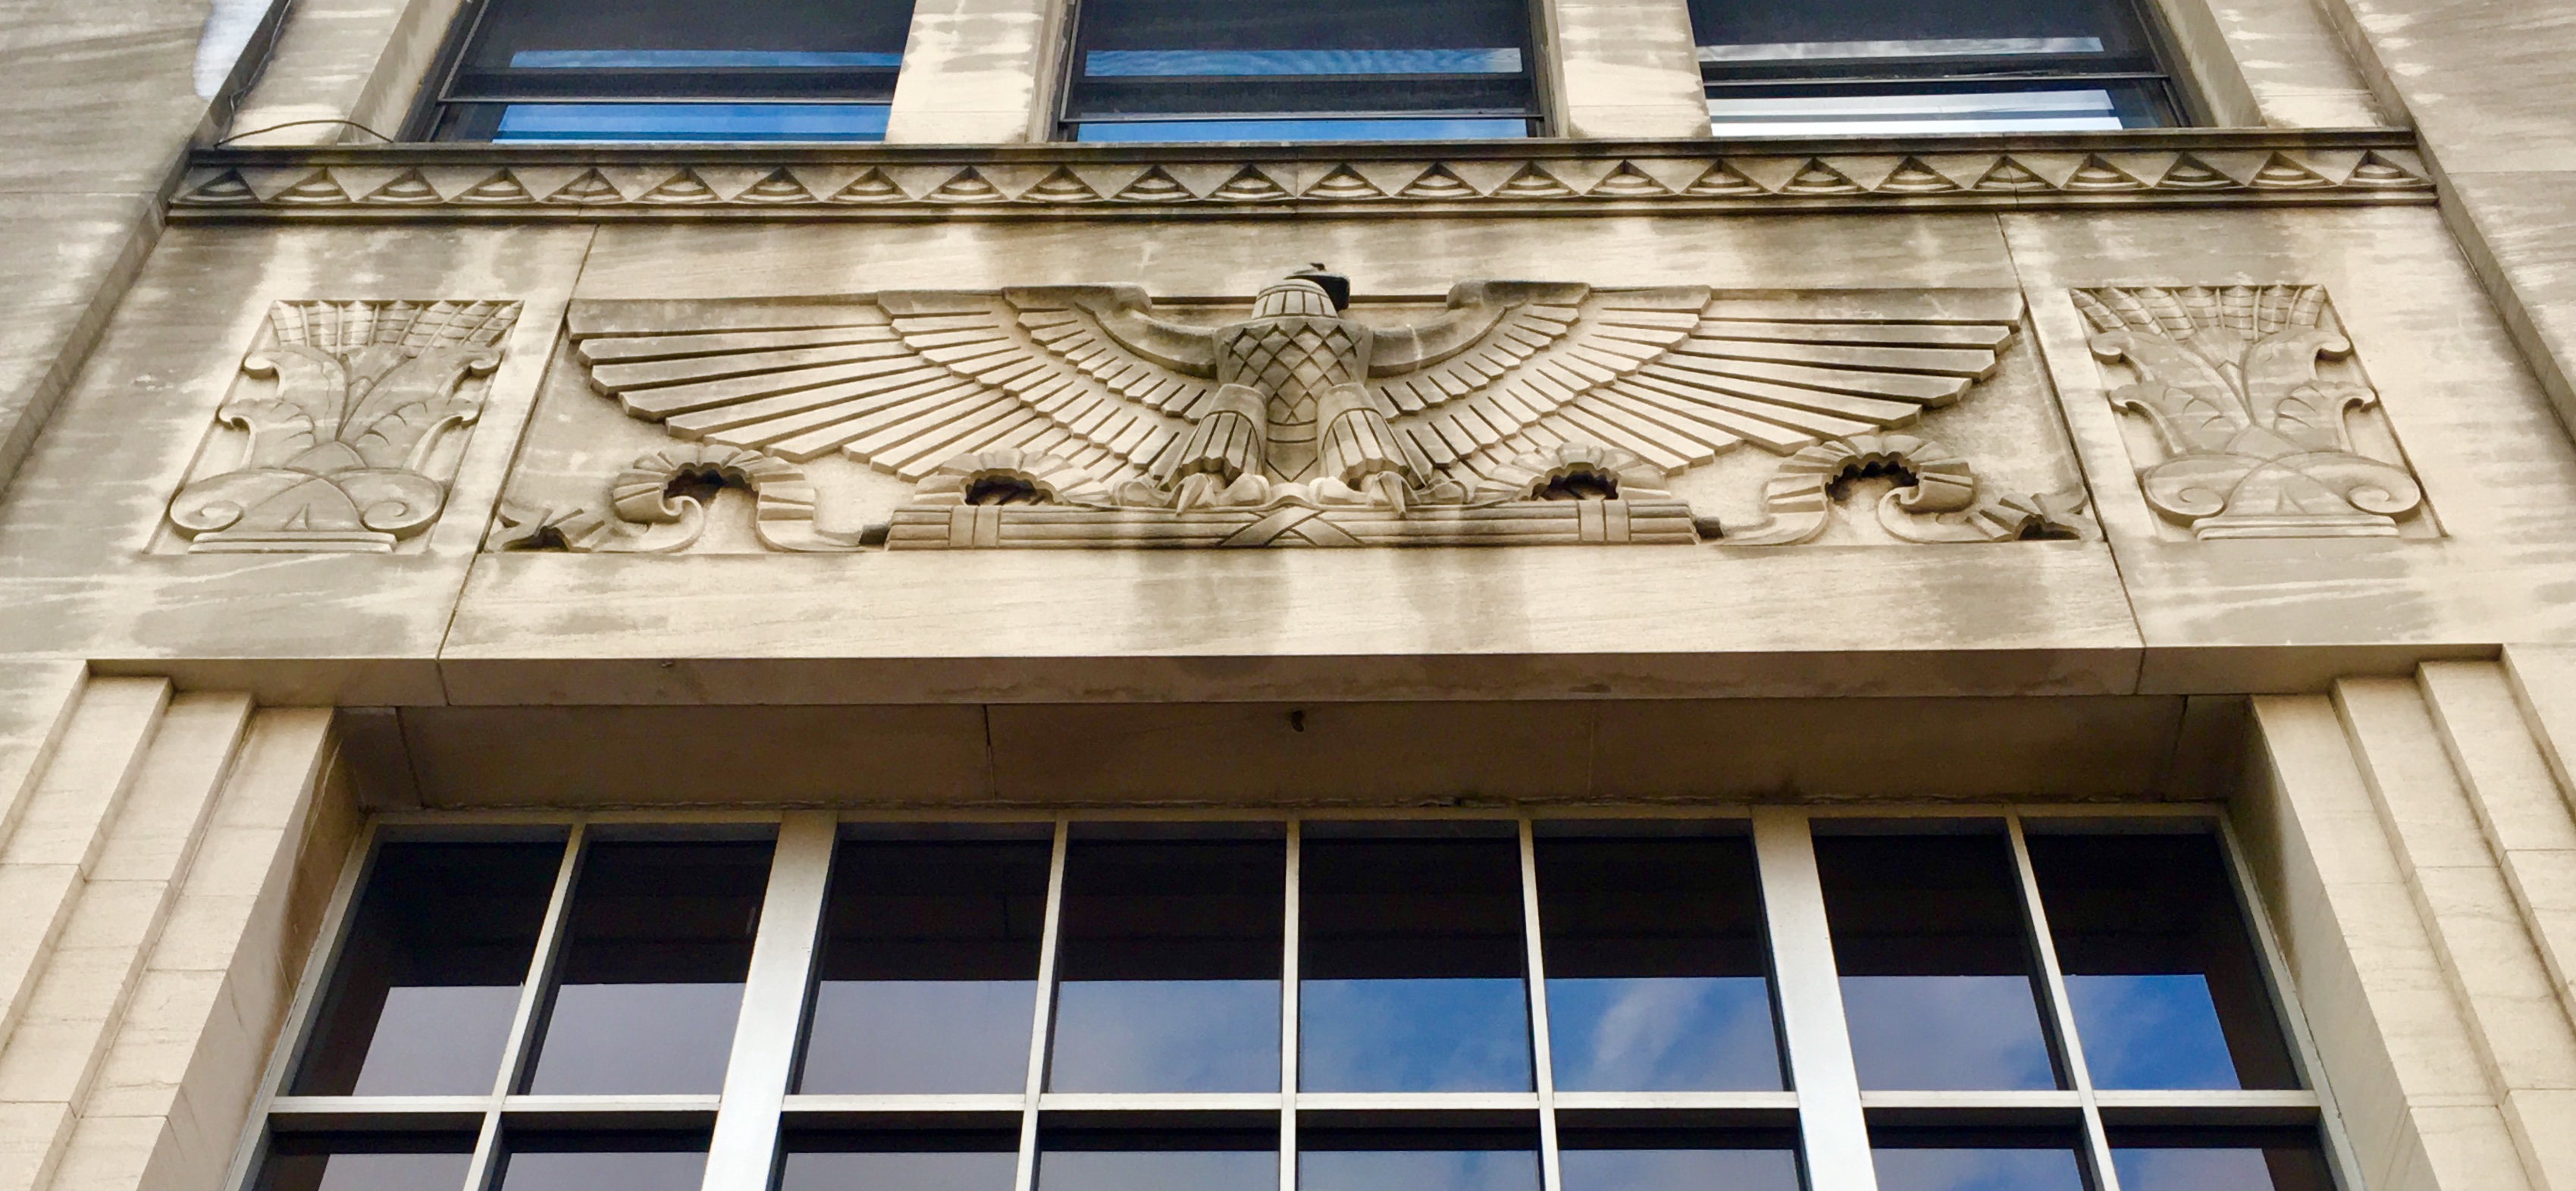 I want to fly like an eagle to the sea. Seen on South Brooklyn Savings Bank’s facade. Eagle photo by Lore Croghan